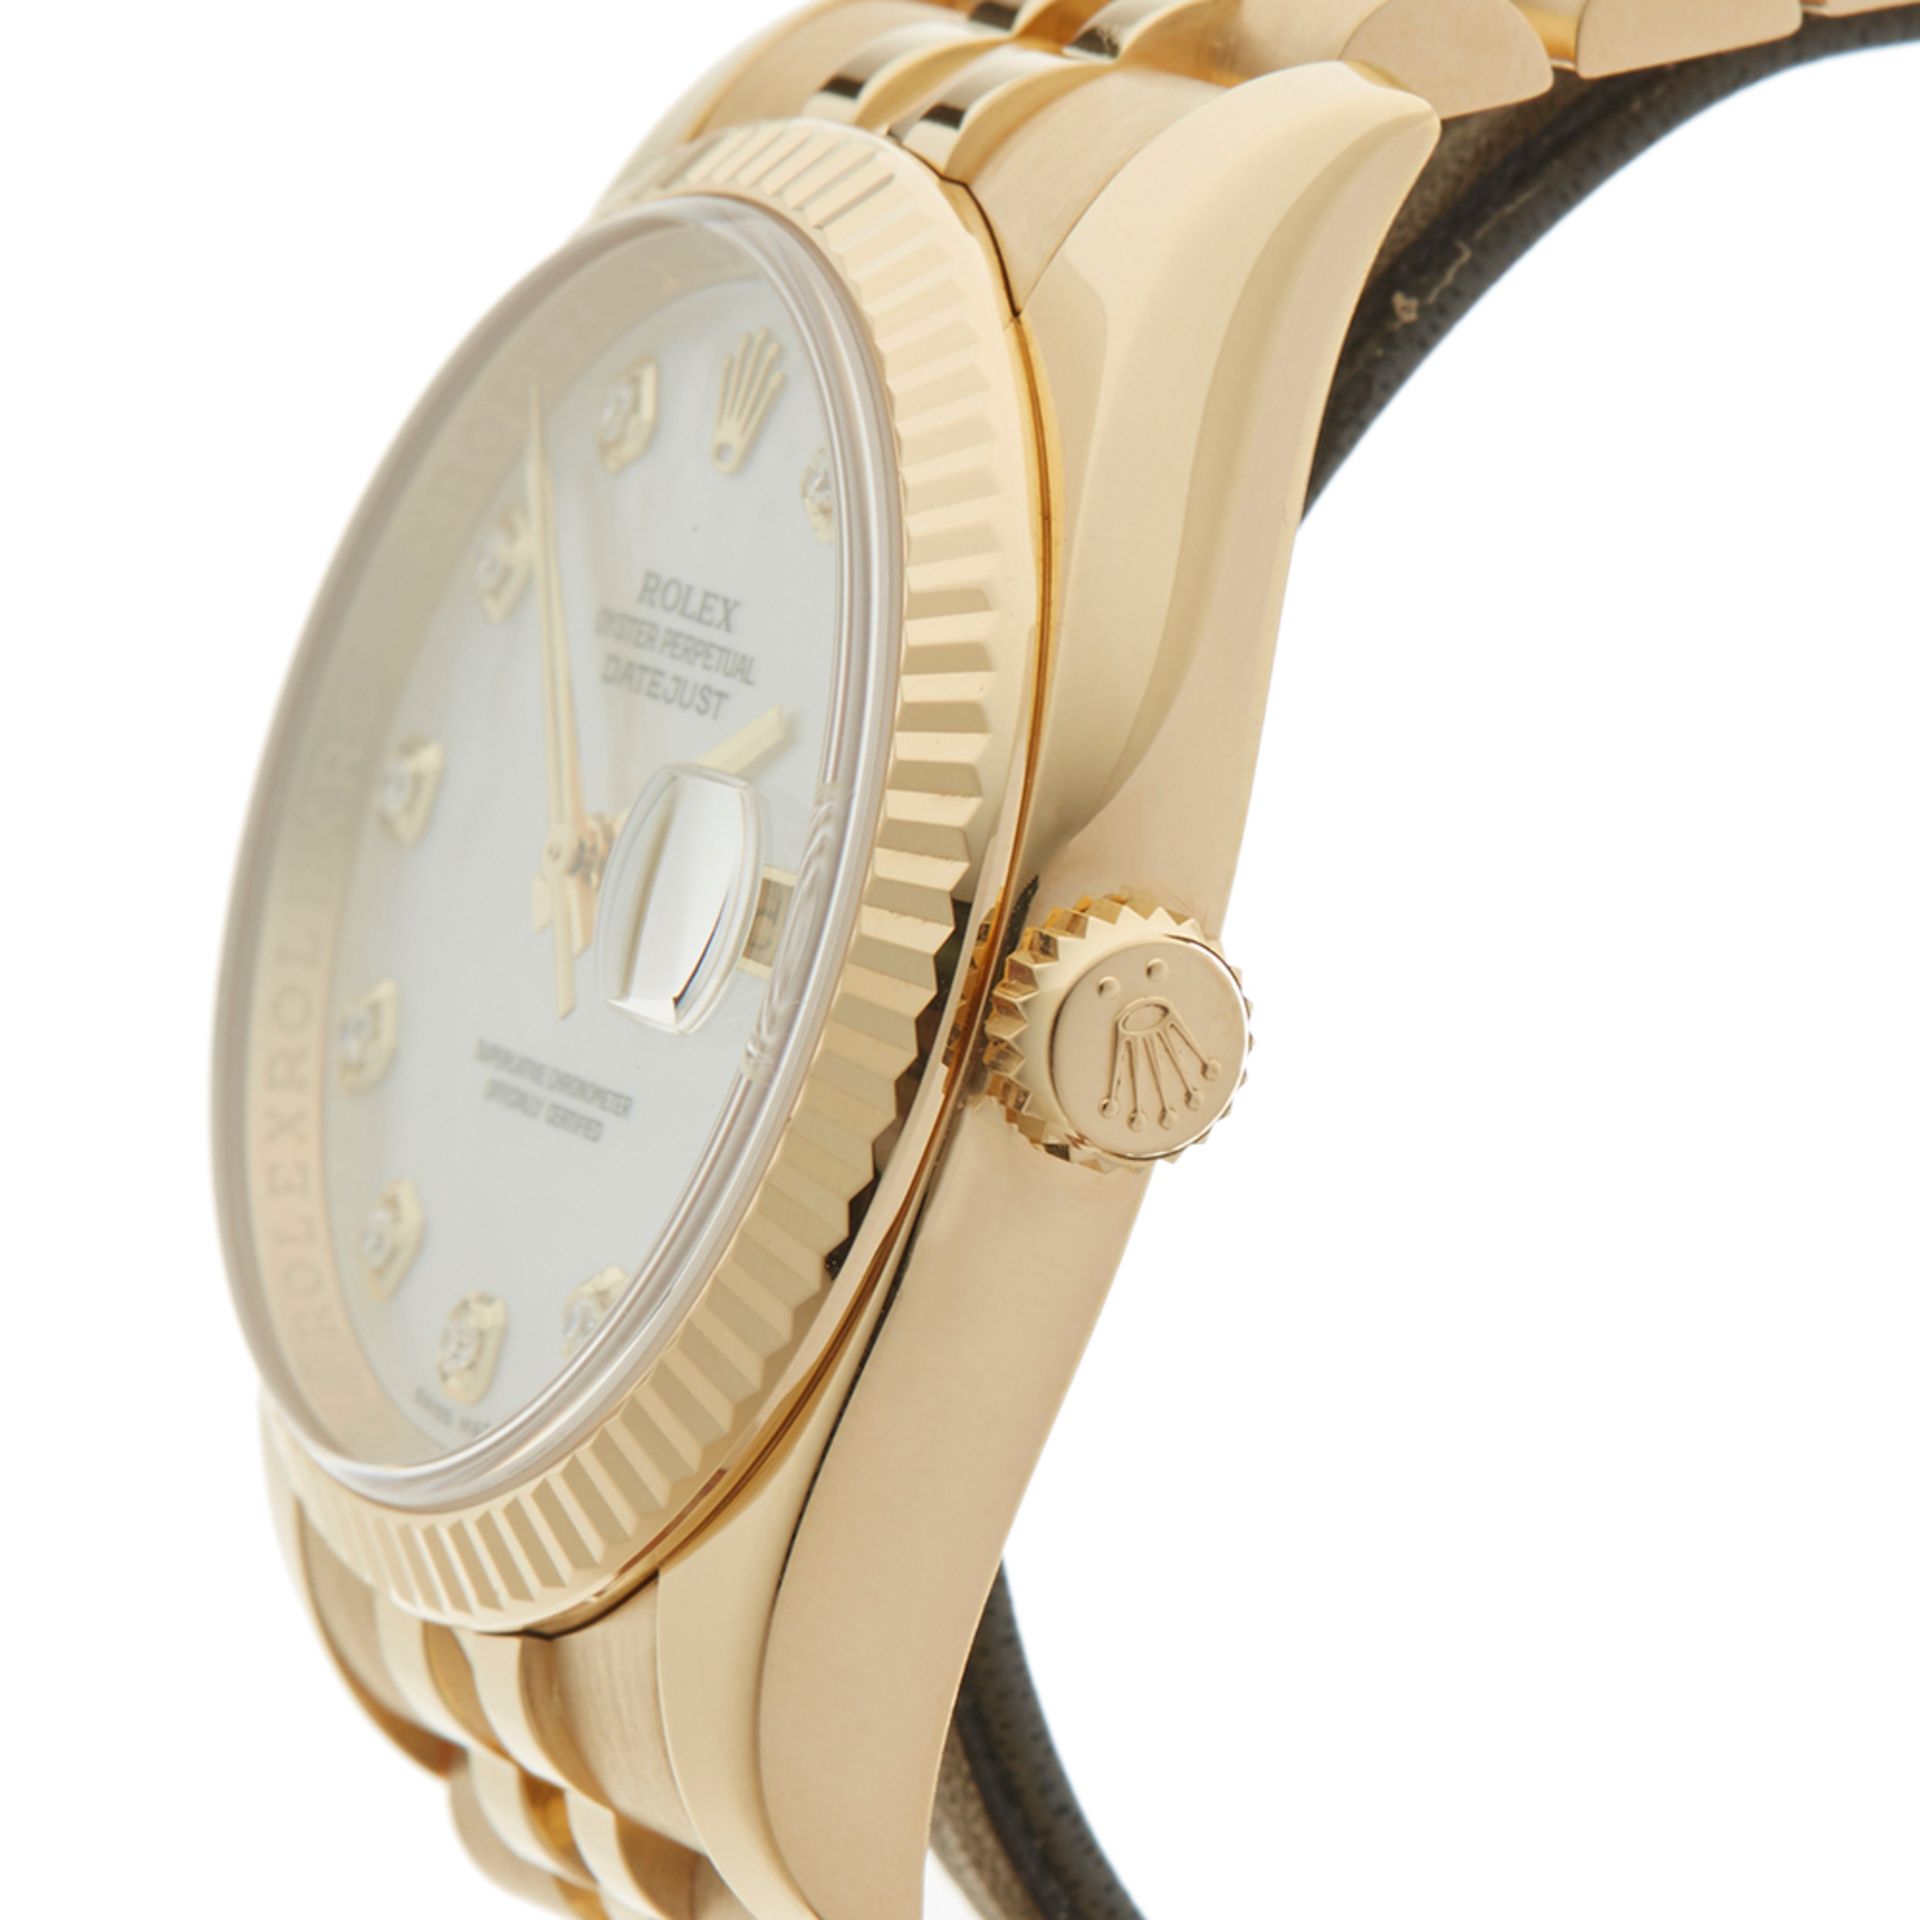 Datejust 36mm 18k Yellow Gold - 116238 - Image 4 of 9